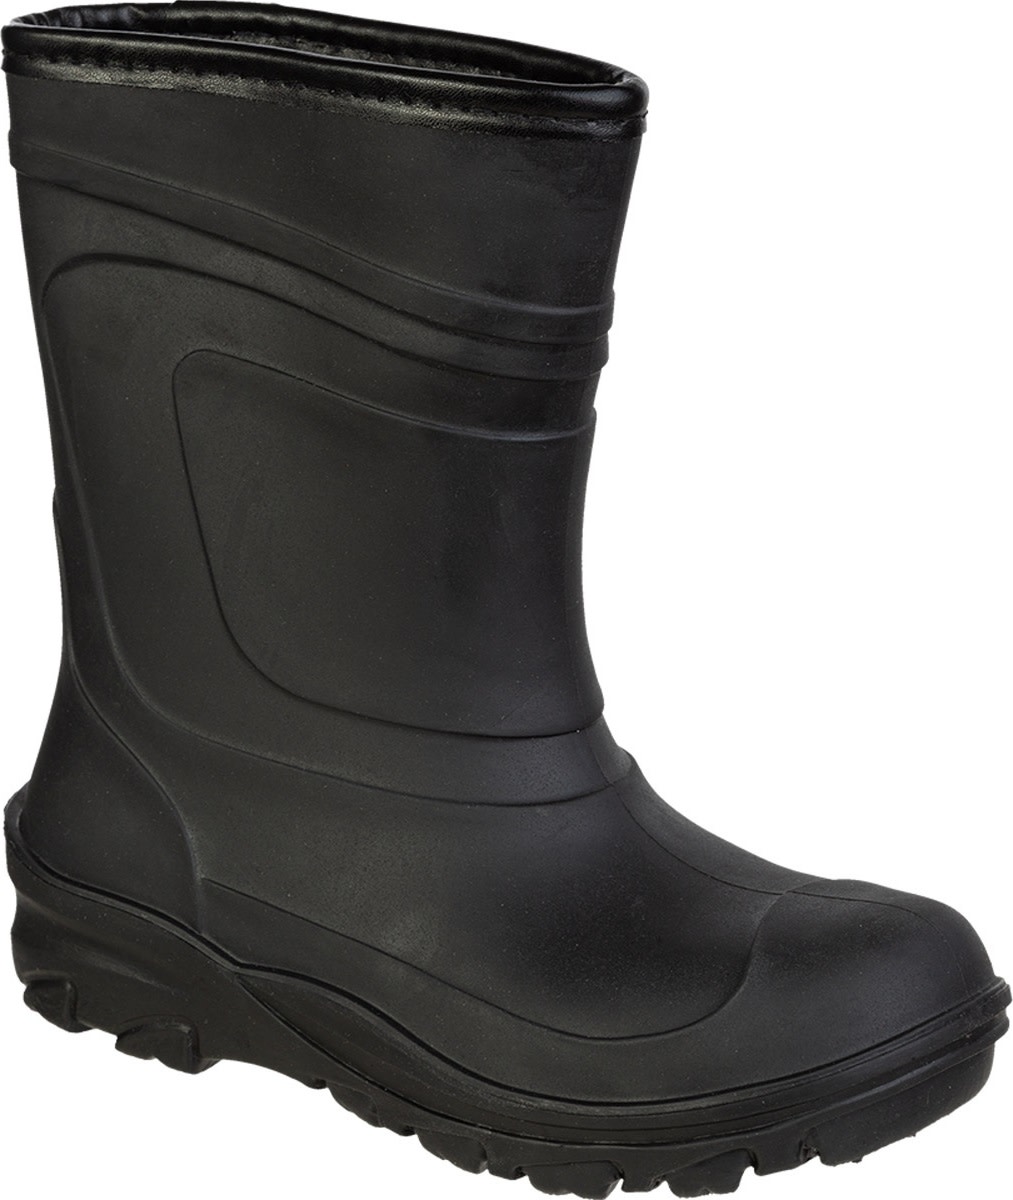 Kids\' FianThermo Boot Black | Kids\' Outnorth Black Boot here Buy | FianThermo